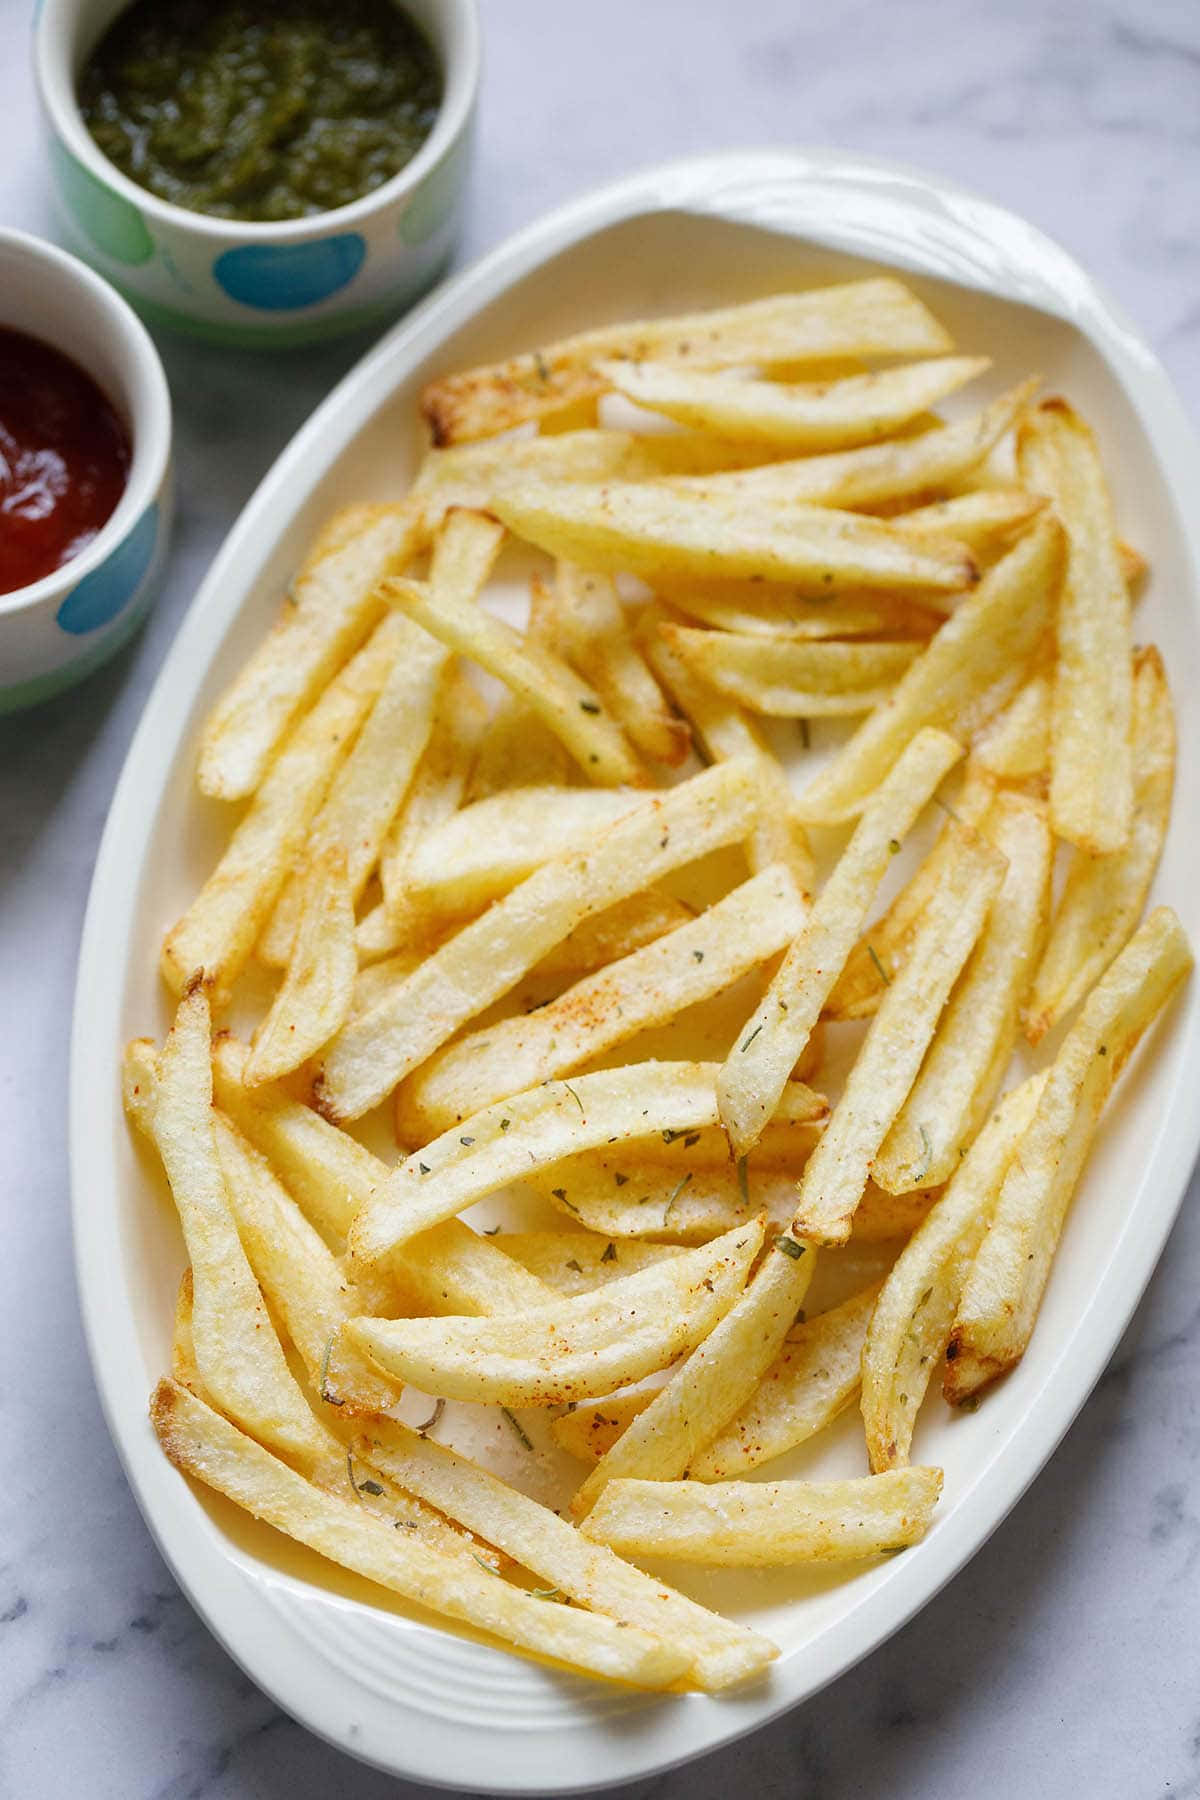 Enjoy your favorite snack - crispy French fries